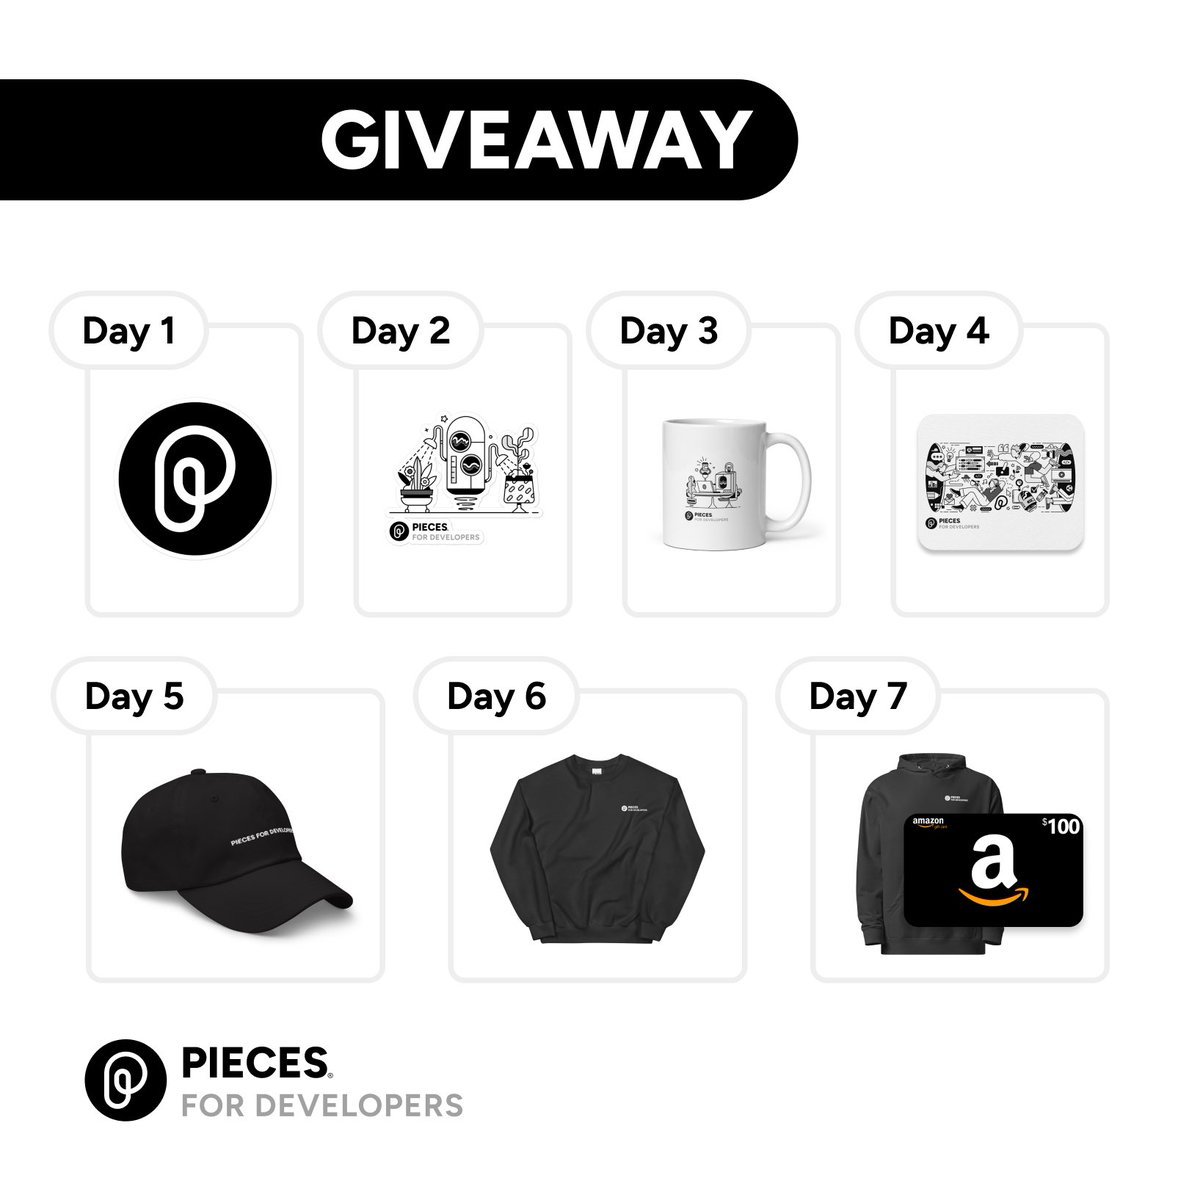 🎁𝗣𝗜𝗘𝗖𝗘𝗦 𝗙𝗢𝗥 𝗗𝗘𝗩𝗘𝗟𝗢𝗣𝗘𝗥𝗦 𝗚𝗜𝗩𝗘𝗔𝗪𝗔𝗬🎁 To celebrate the launch of our new Pieces Shop, we’re kicking off 7 days of merch giveaways!  To enter the giveaway: 1. Like & RT 𝘁𝗵𝗶𝘀 post 2. Make sure you’re following @getpieces Earn an extra entry for each…